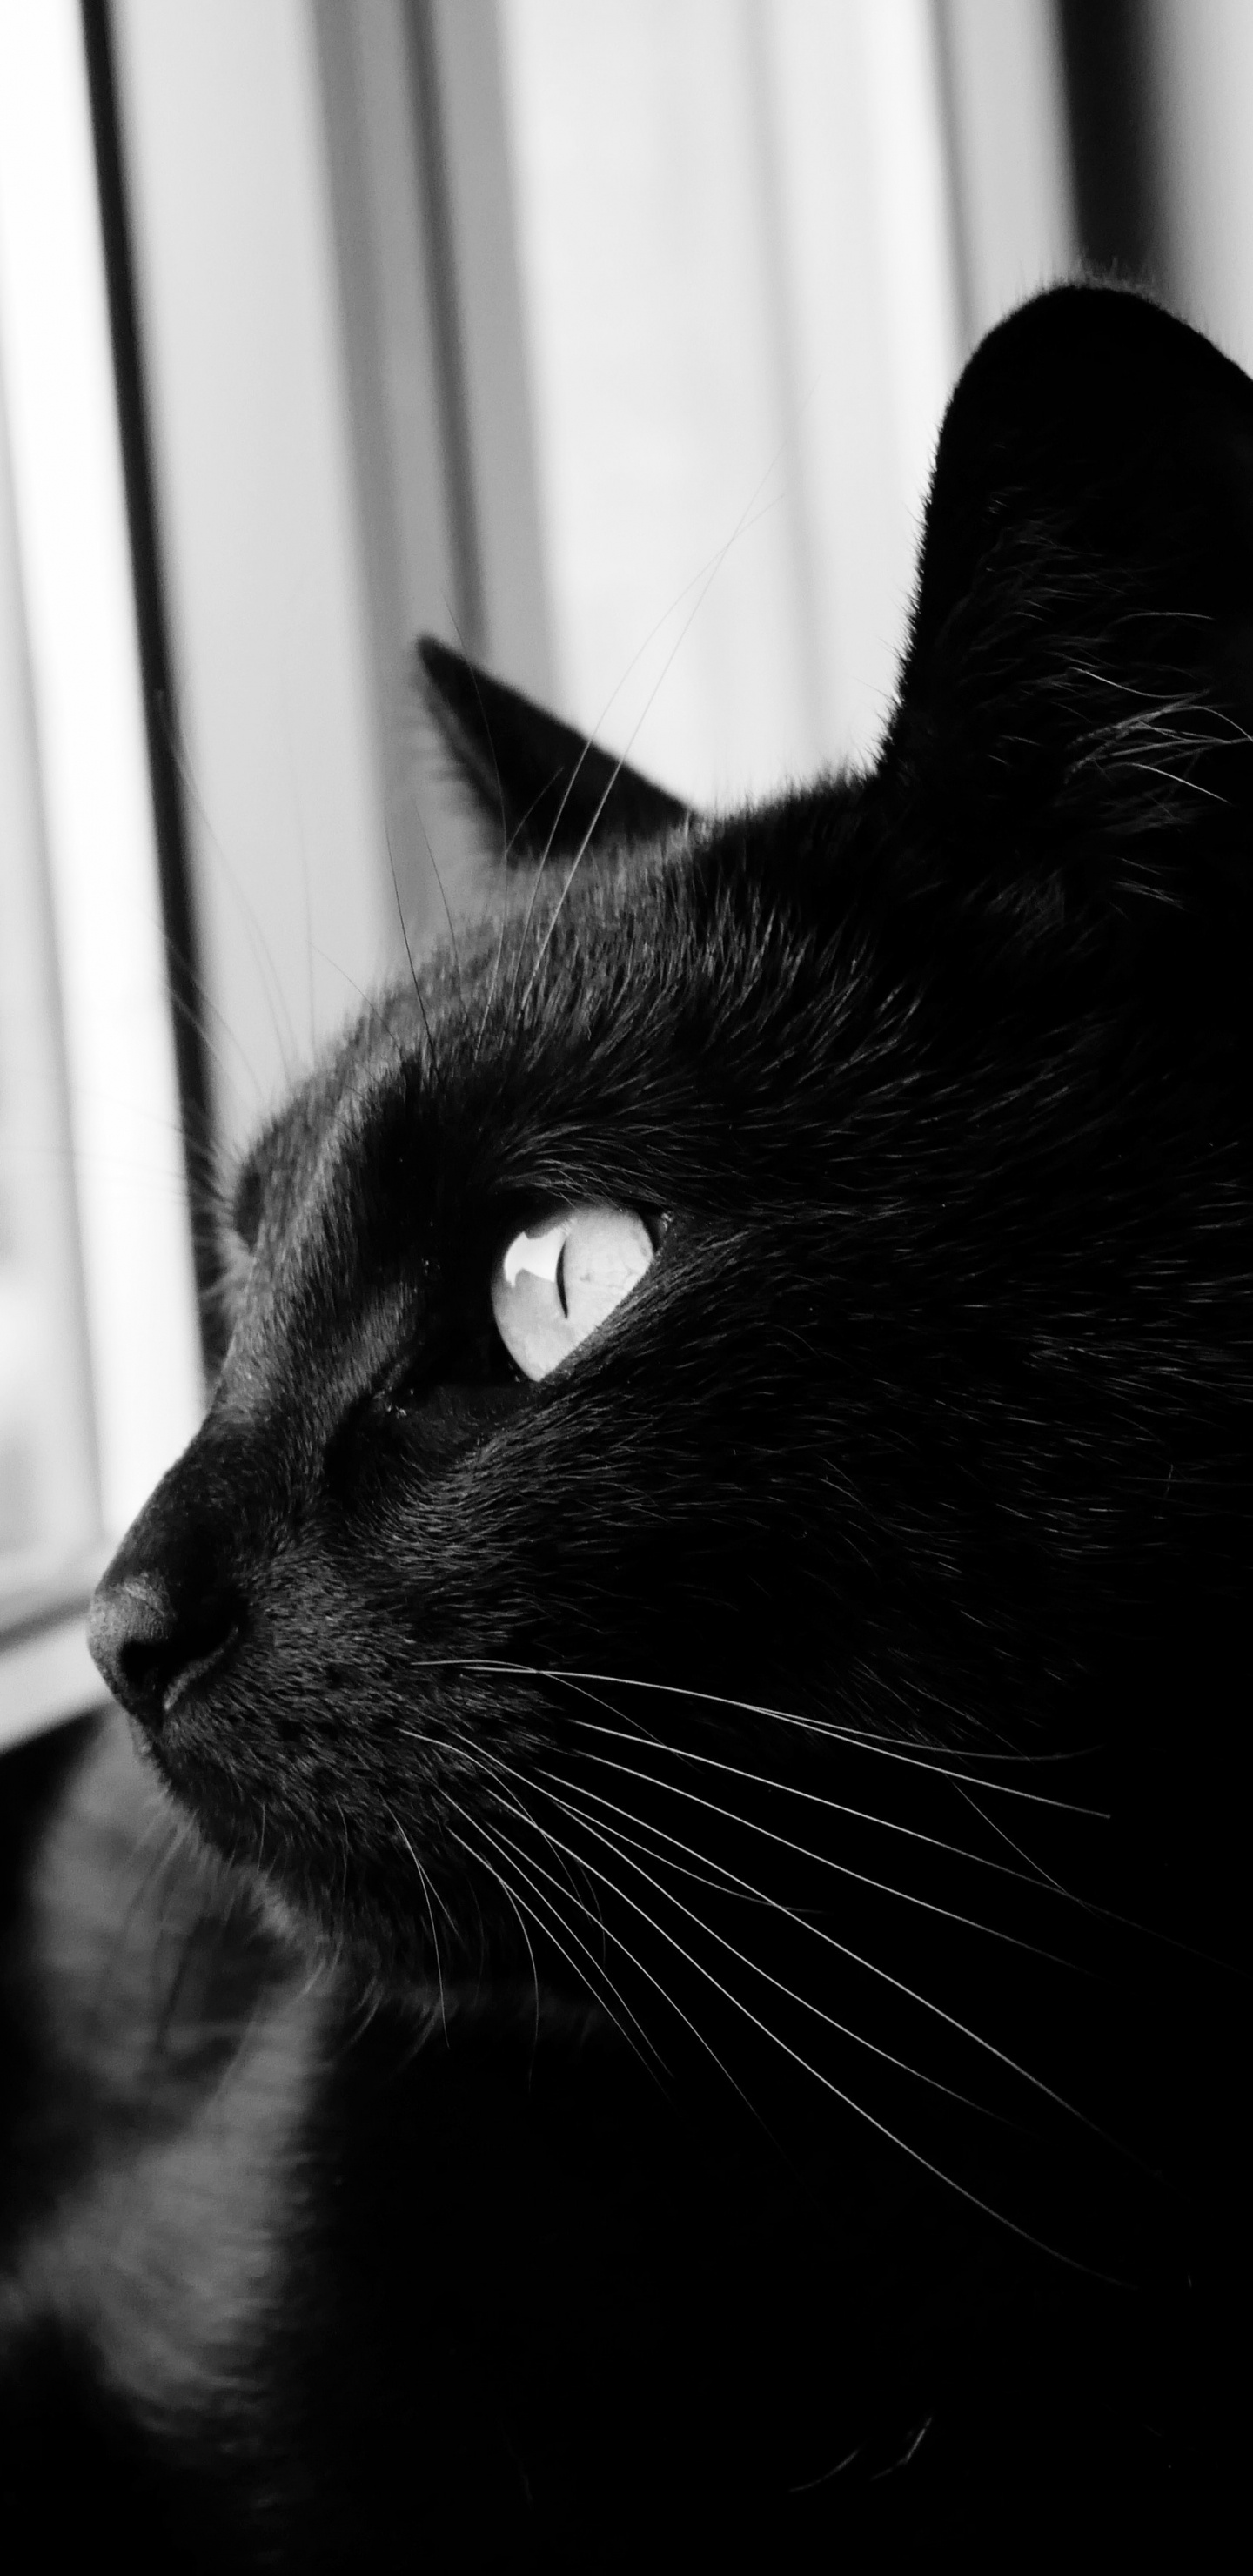 Black Cat Looking at The Window. Wallpaper in 1440x2960 Resolution